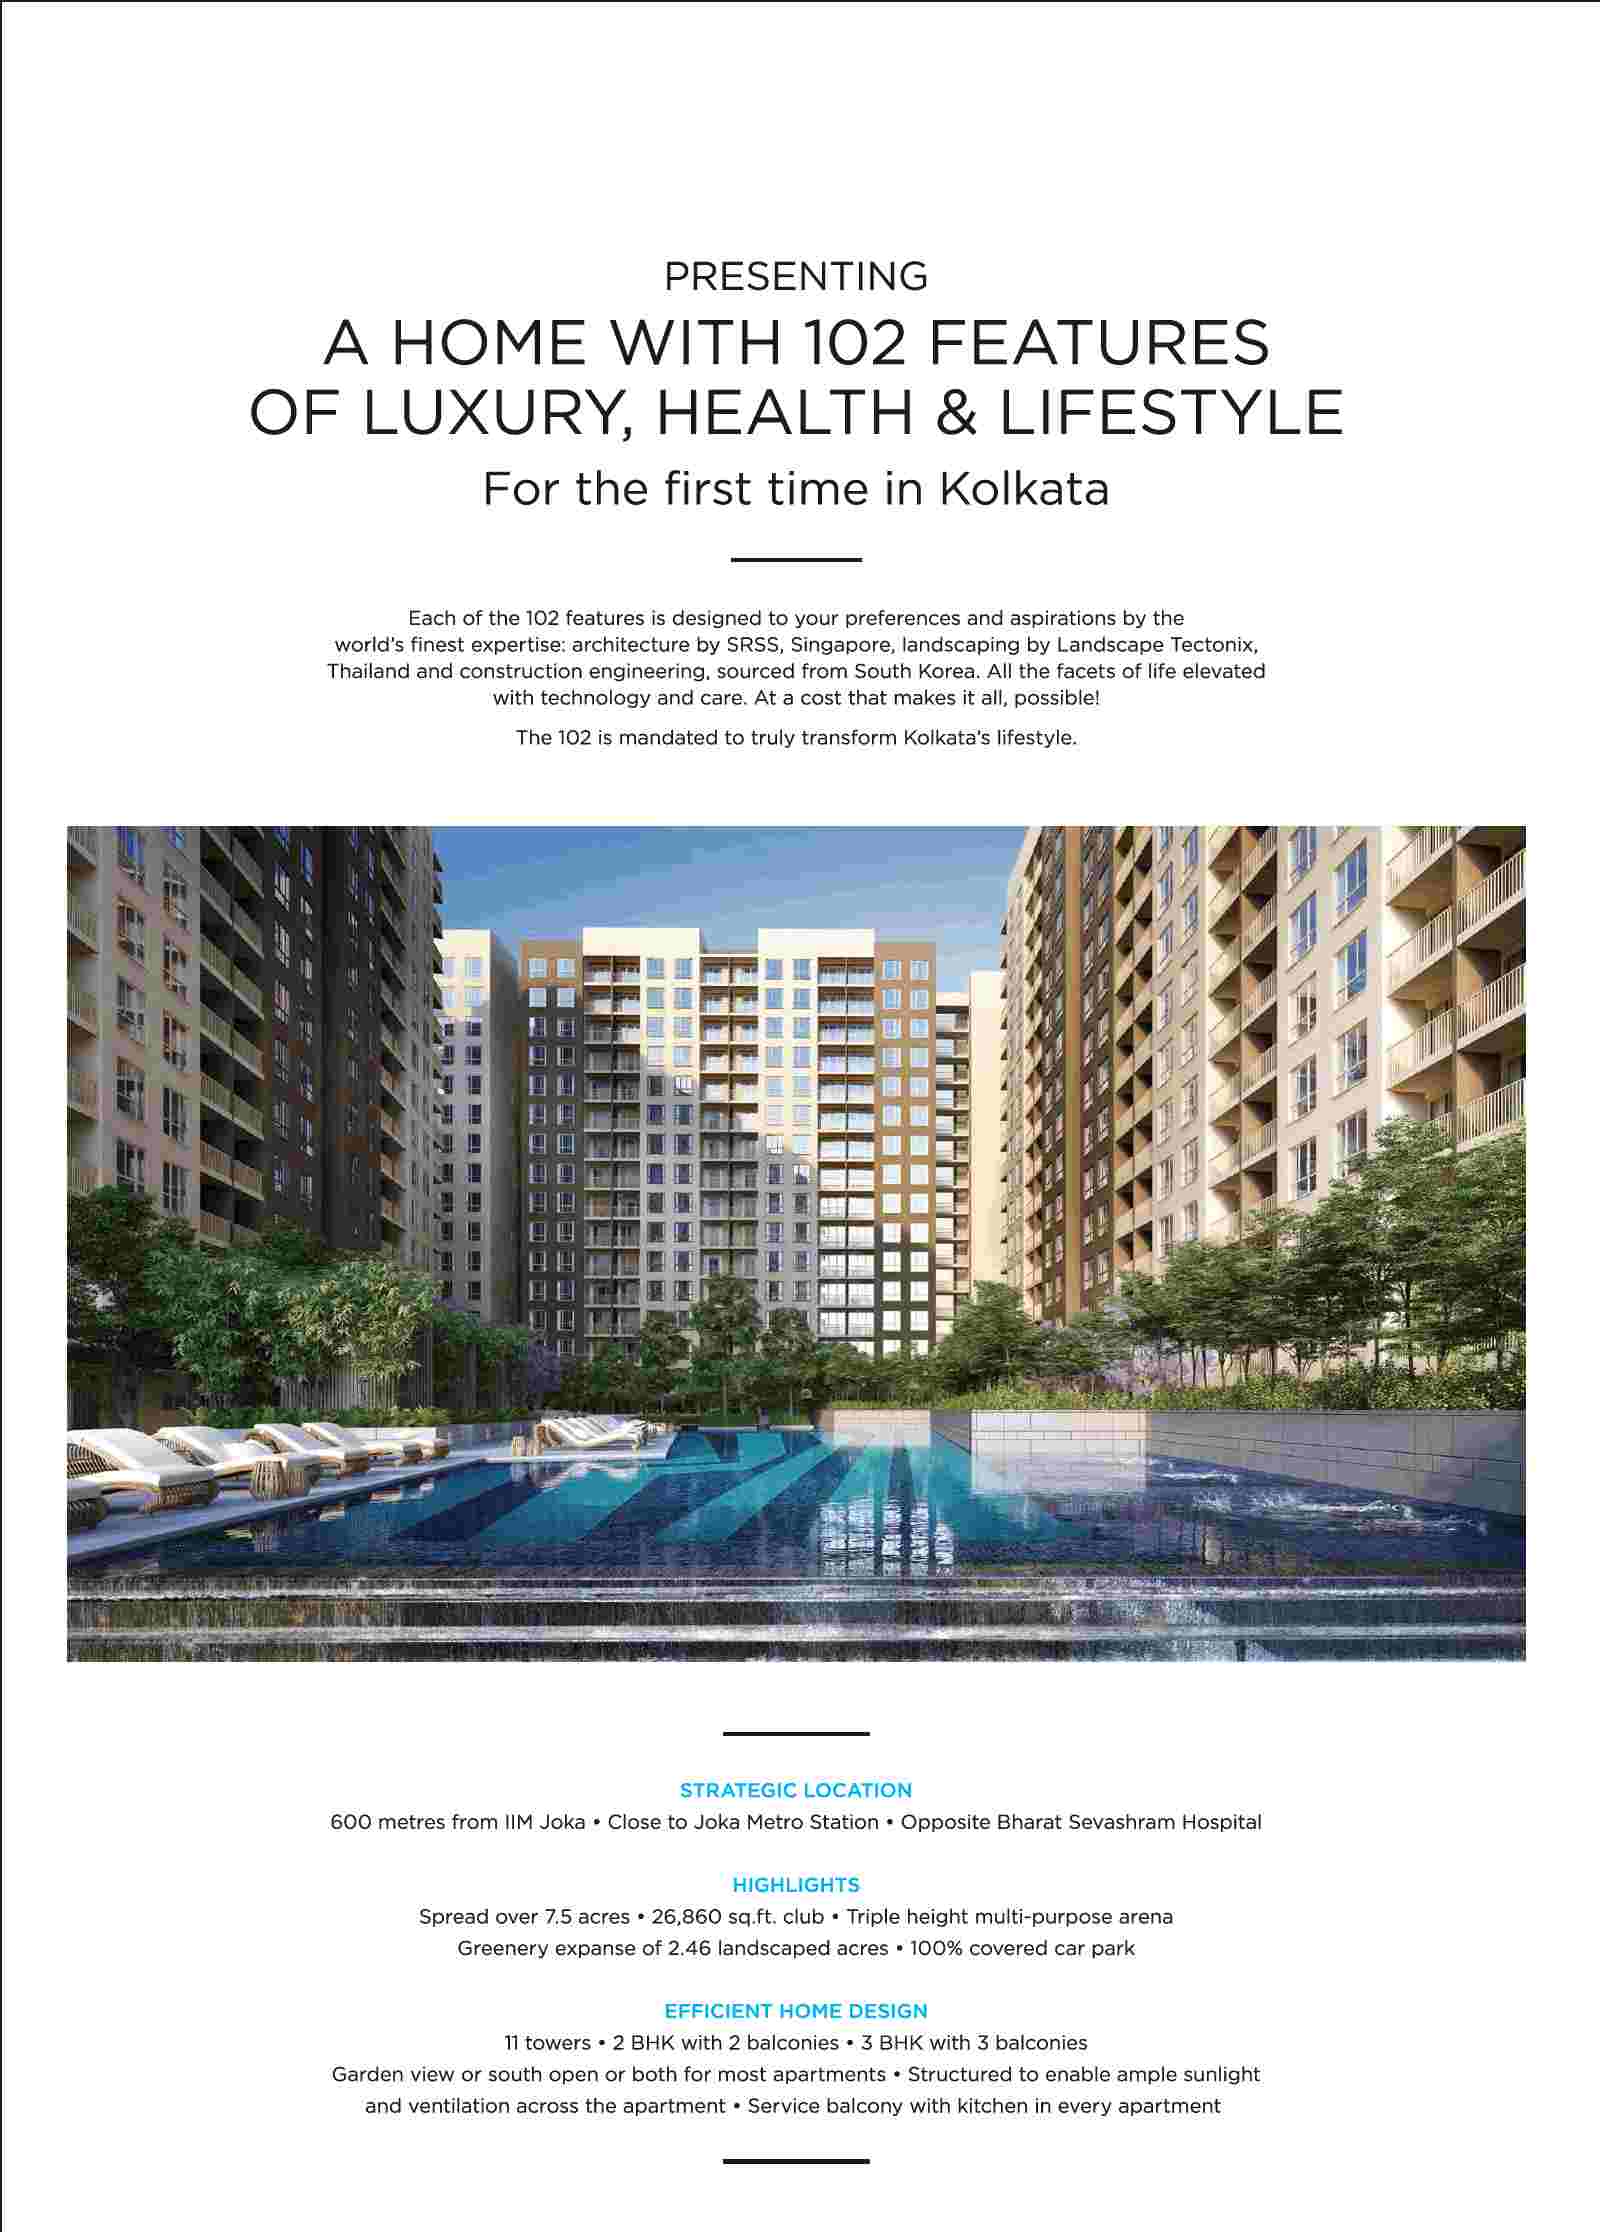 Book a home with 102 features of luxury, health & lifestyle at PS Vinayak The 102 in Kolkata Update